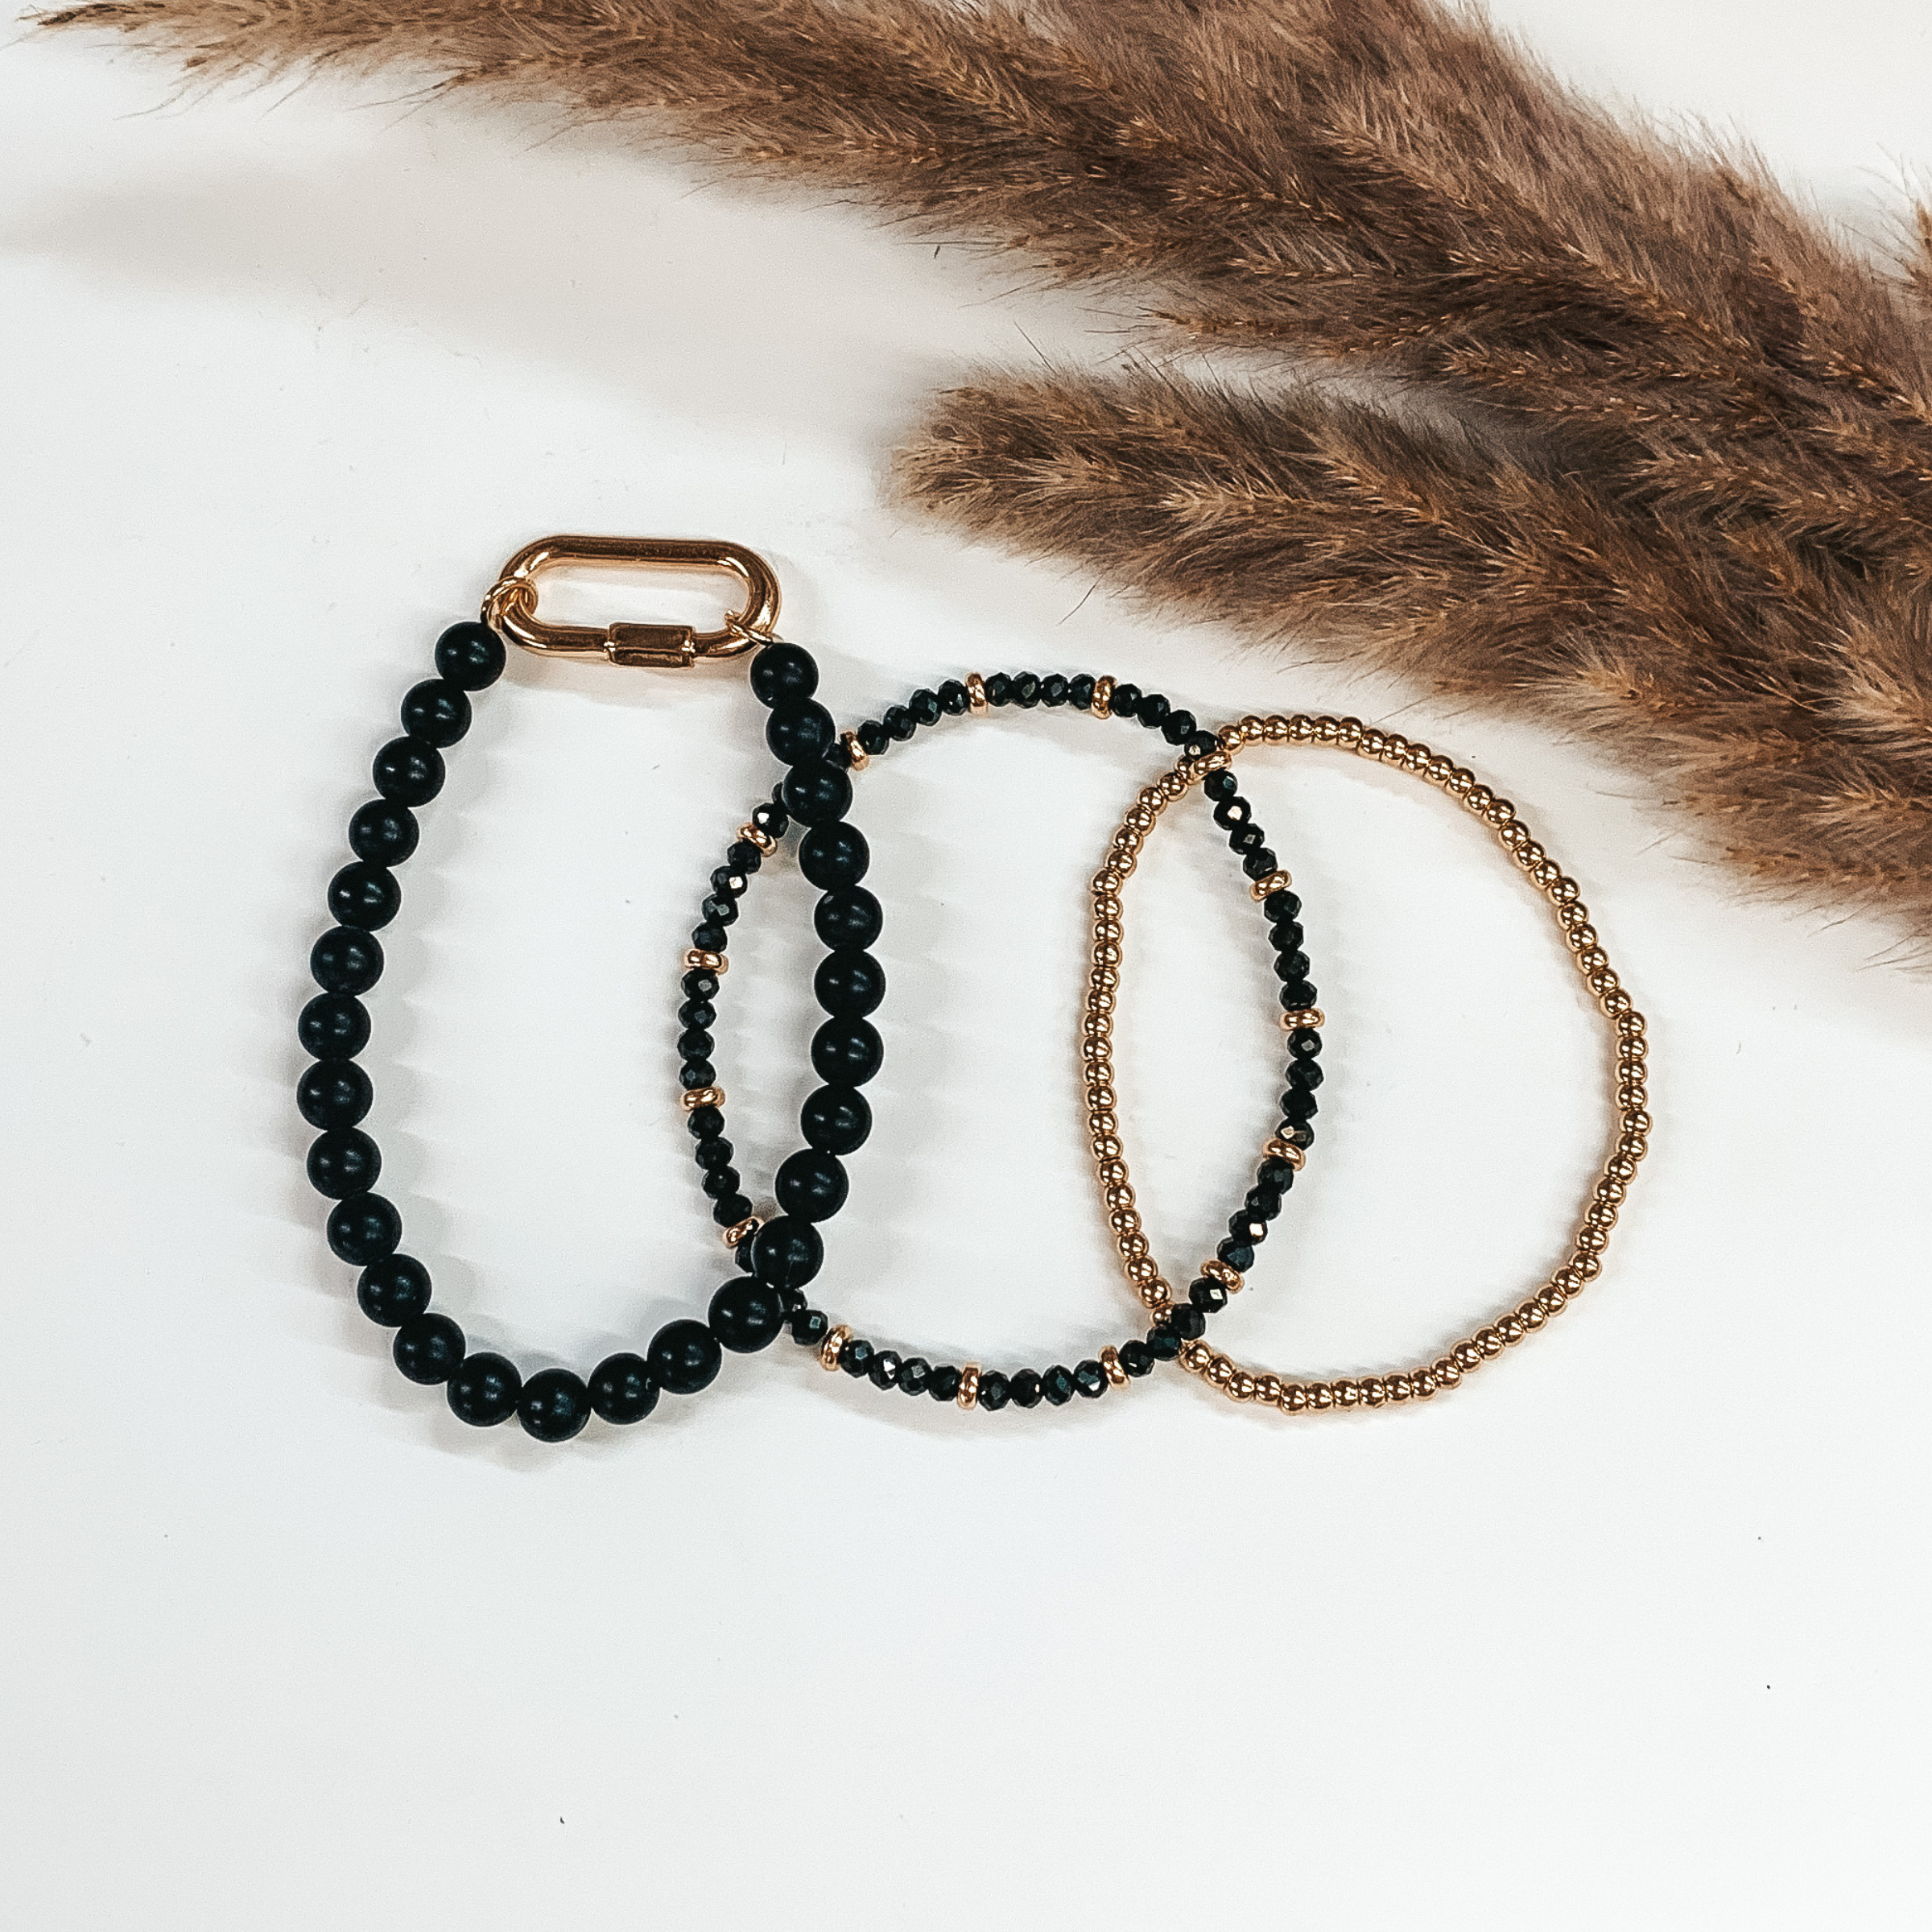 Pebble Beach Bracelets in Black/Gold - Giddy Up Glamour Boutique